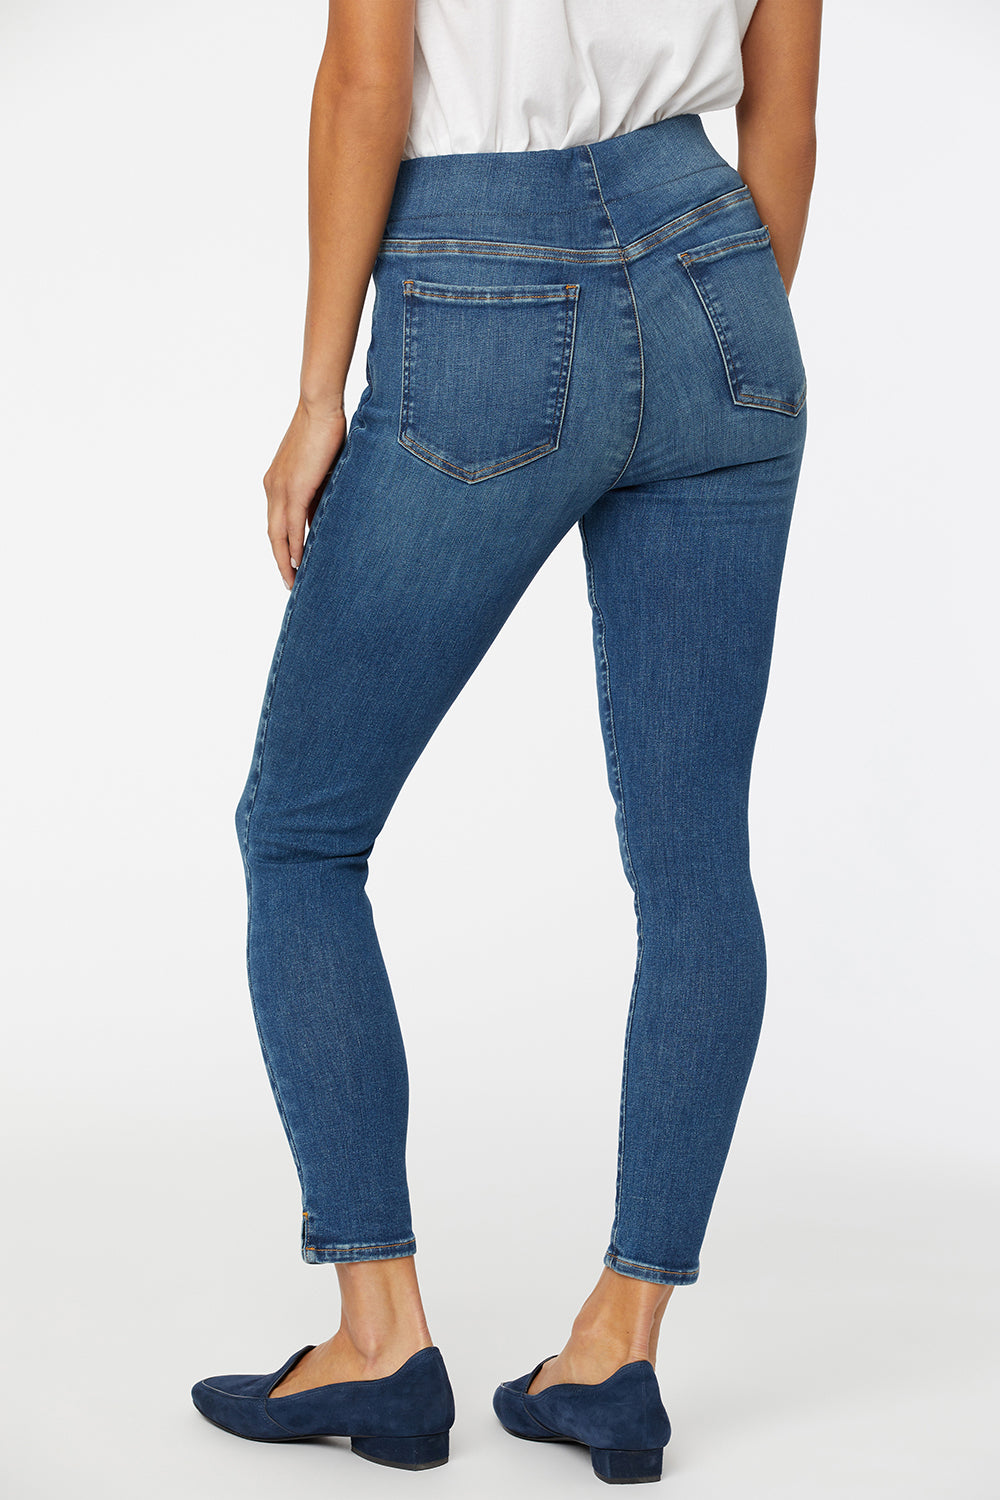 Super Skinny Ankle Pull-On Jeans In Petite In SpanSpring™ Denim